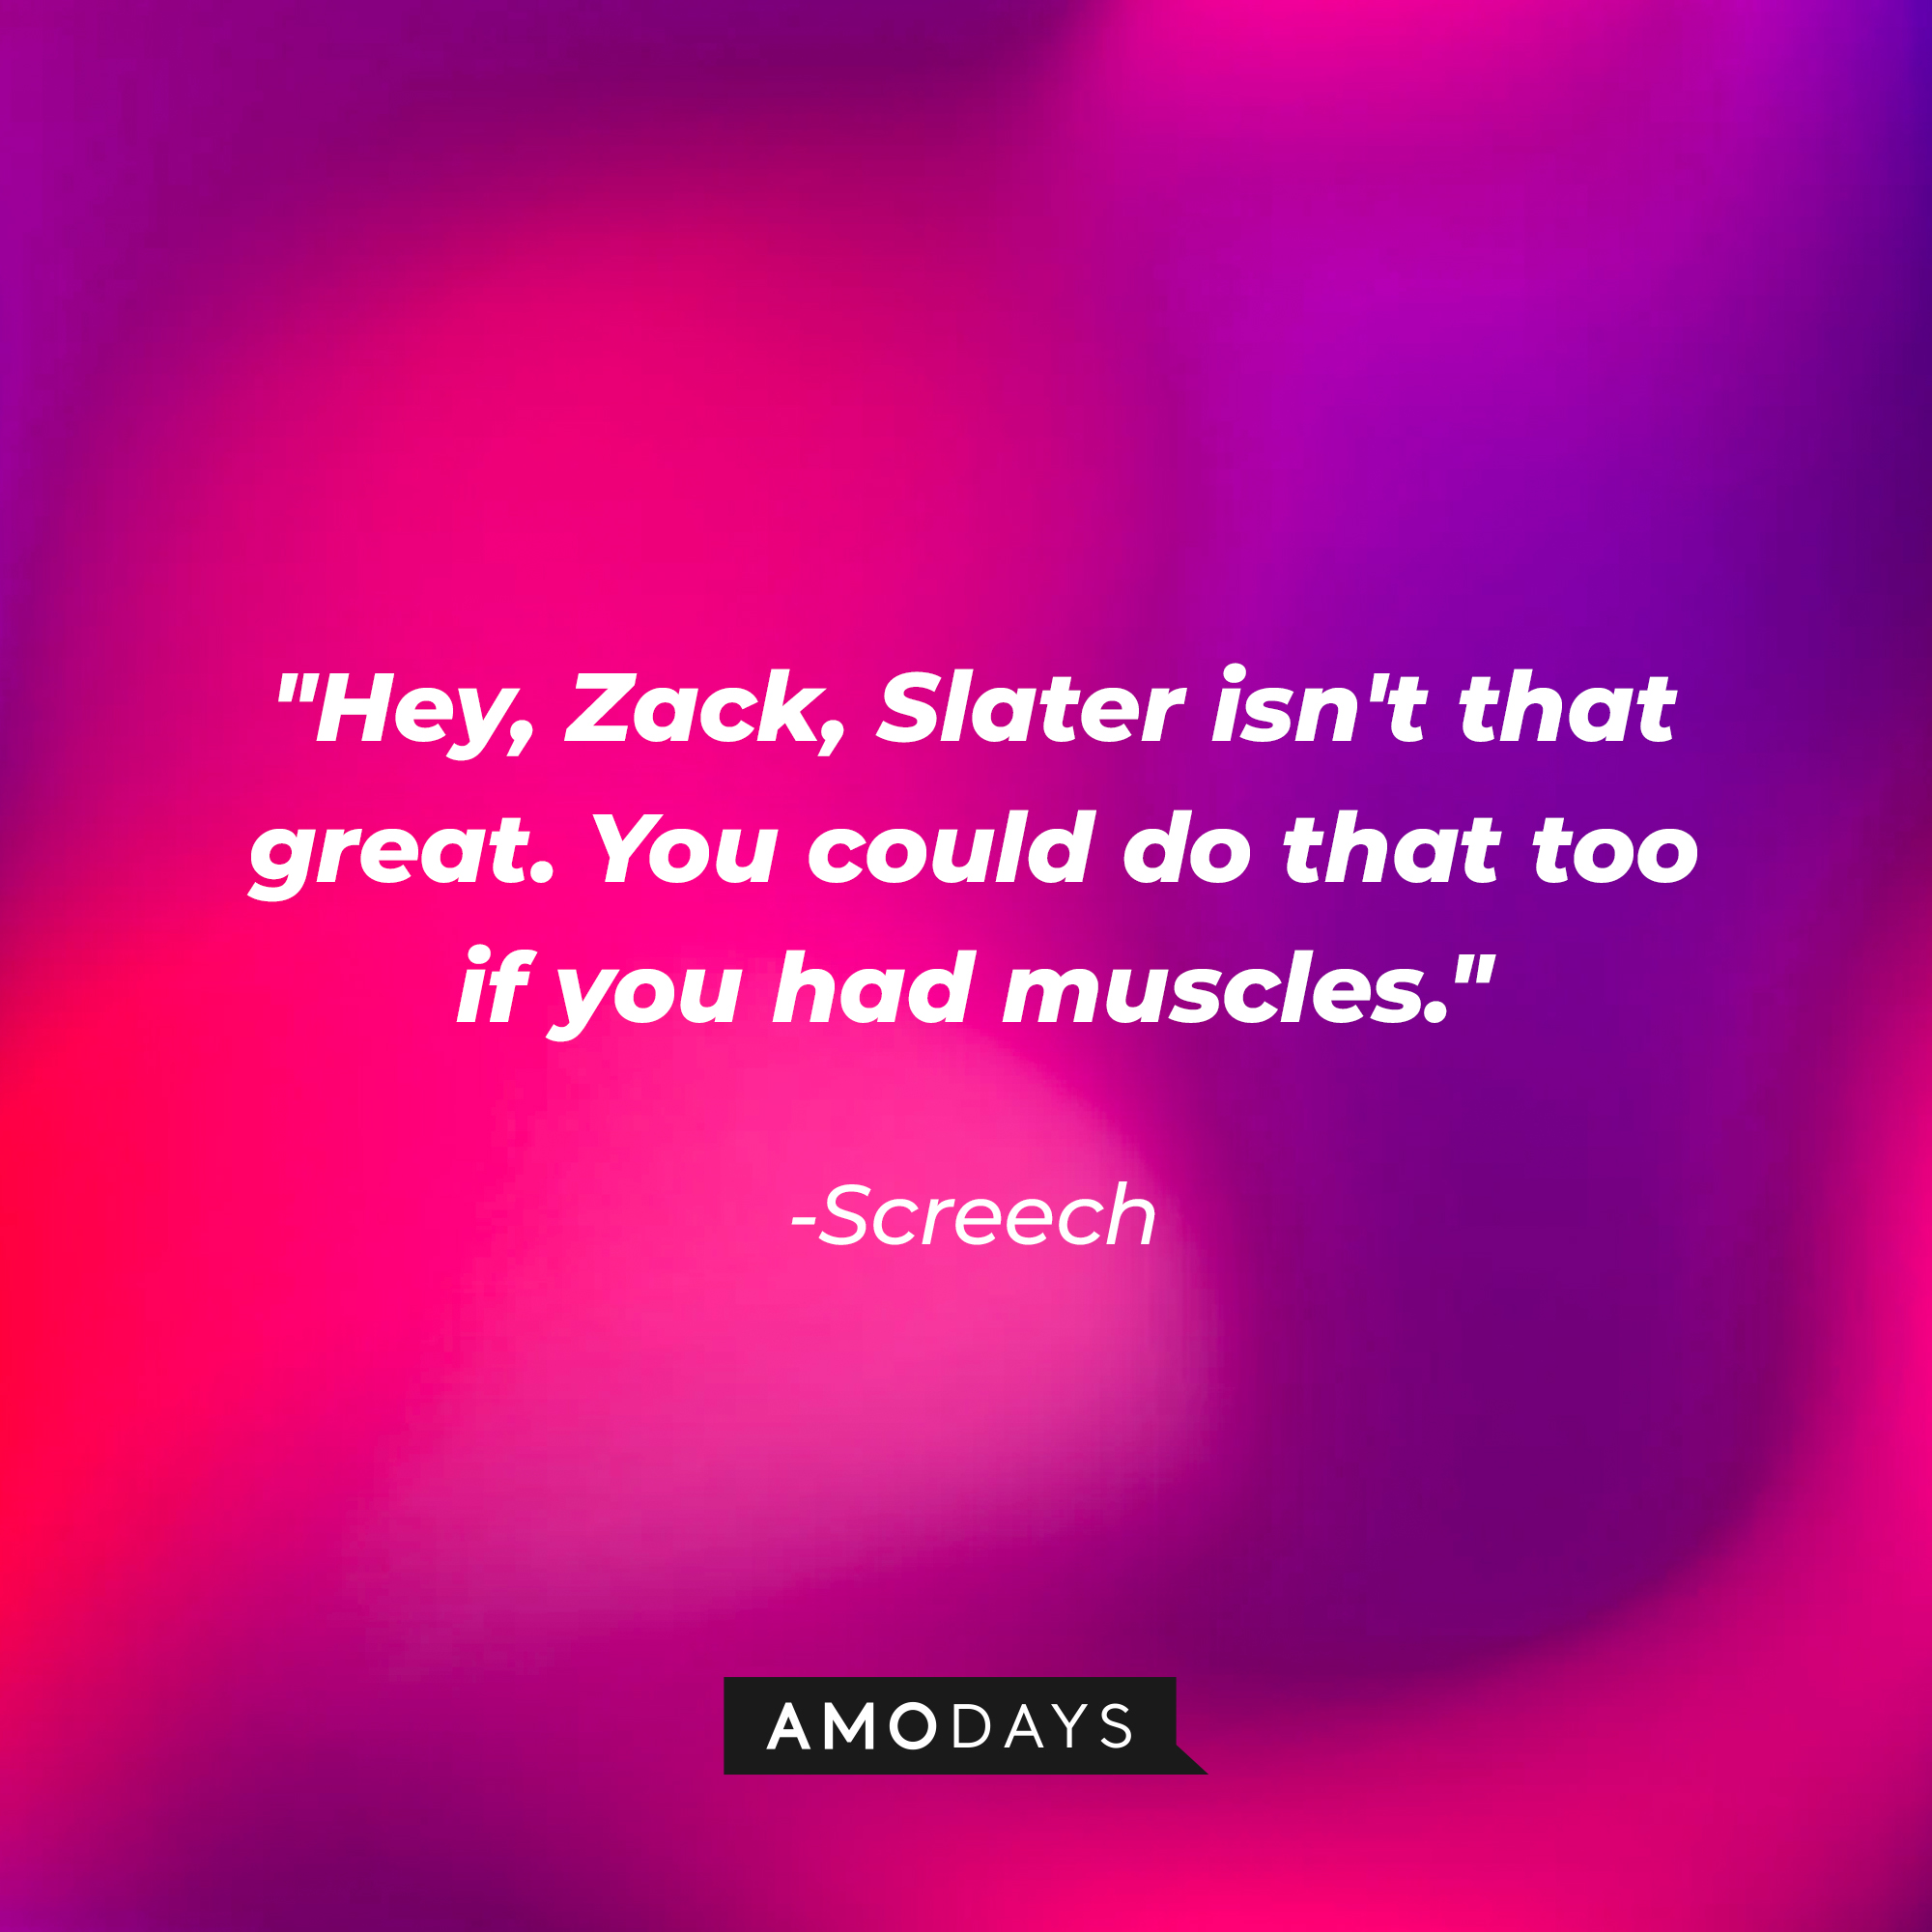 Screech with his quote, "Hey, Zack, Slater isn't that great. You could do that too if you had muscles." | Source: youtube.com/SavedbytheBell